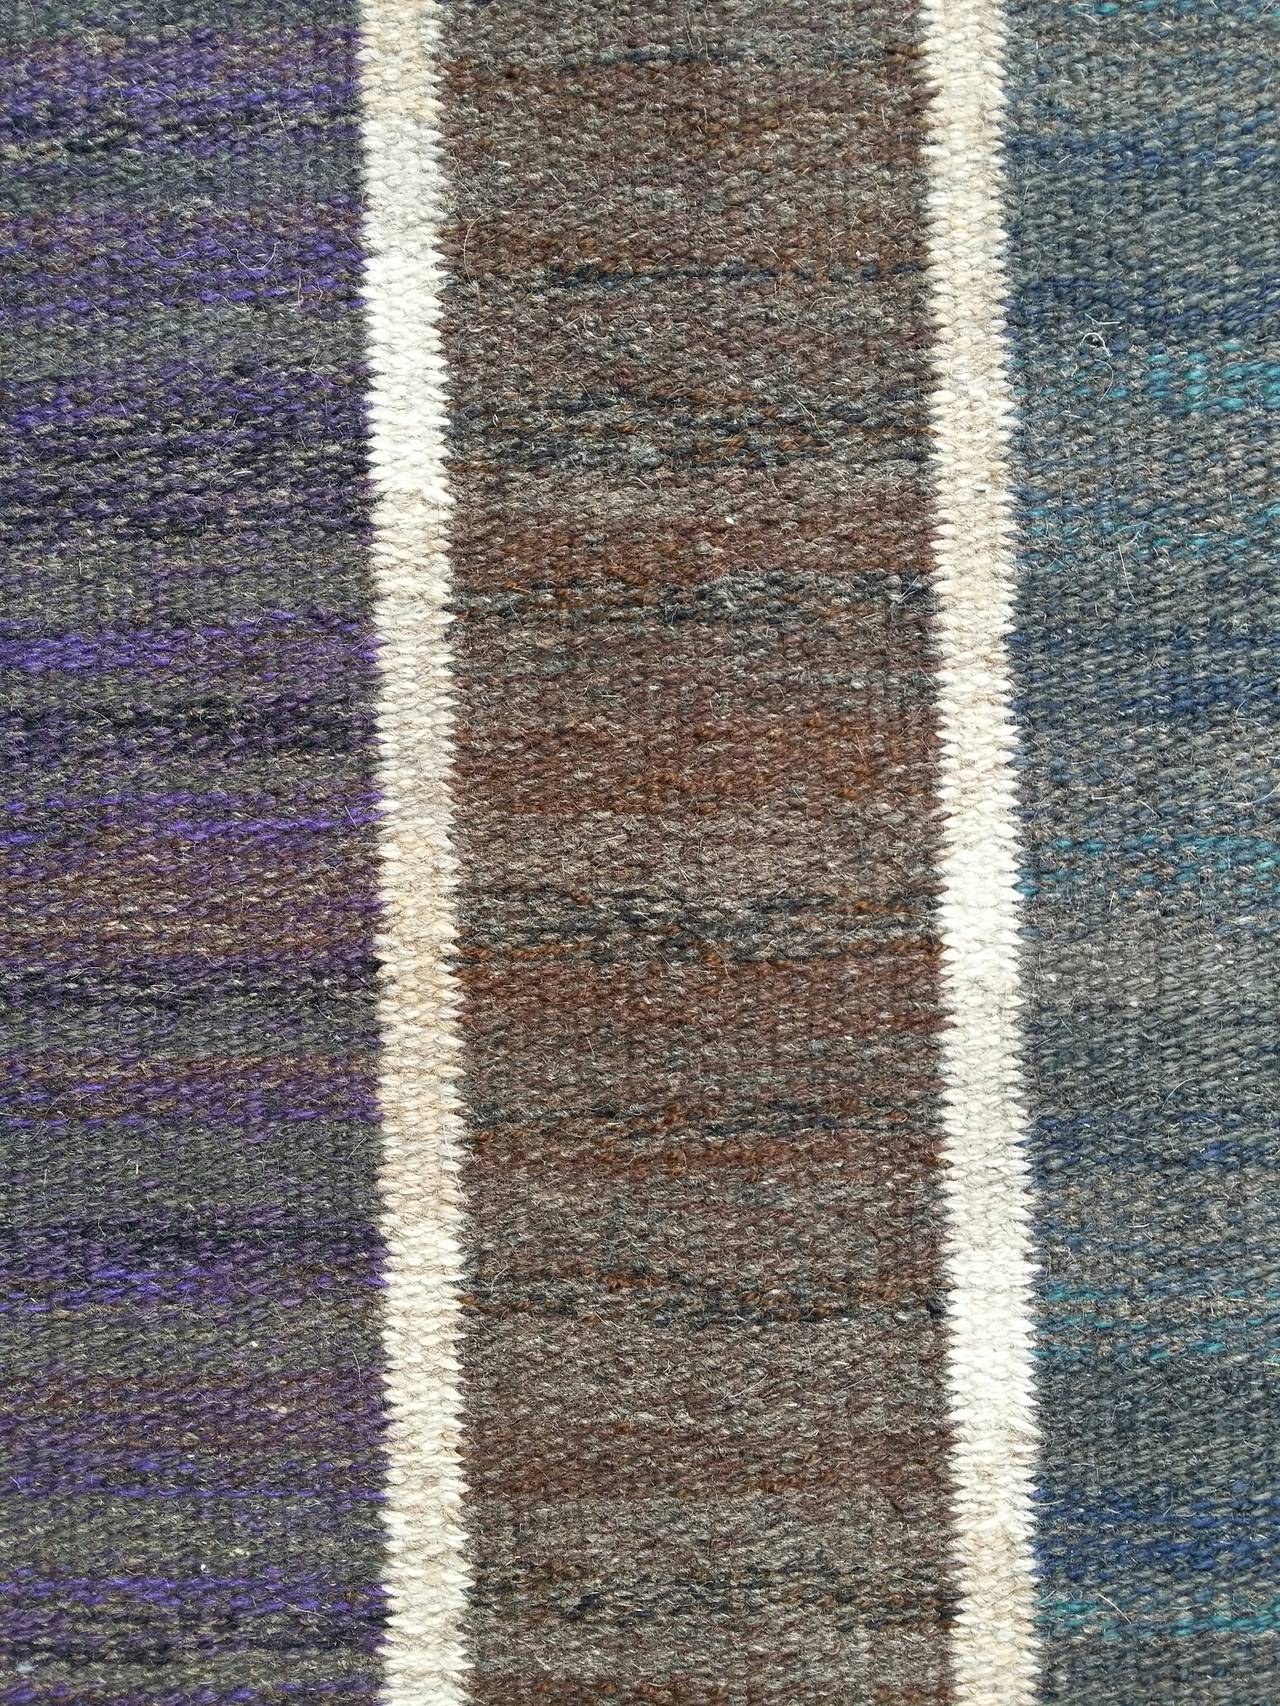 Swedish flatwoven rölakan rug,designed by irma Kronlund. Executed  by Kroniberg Läns Hemslöjd. Signed: IK KLH. Warp: linen yarn,light beige,ca. Z5S. Patterning weft: wool,Z4 spun. Condition: very good,cleaned ,stopped ends.